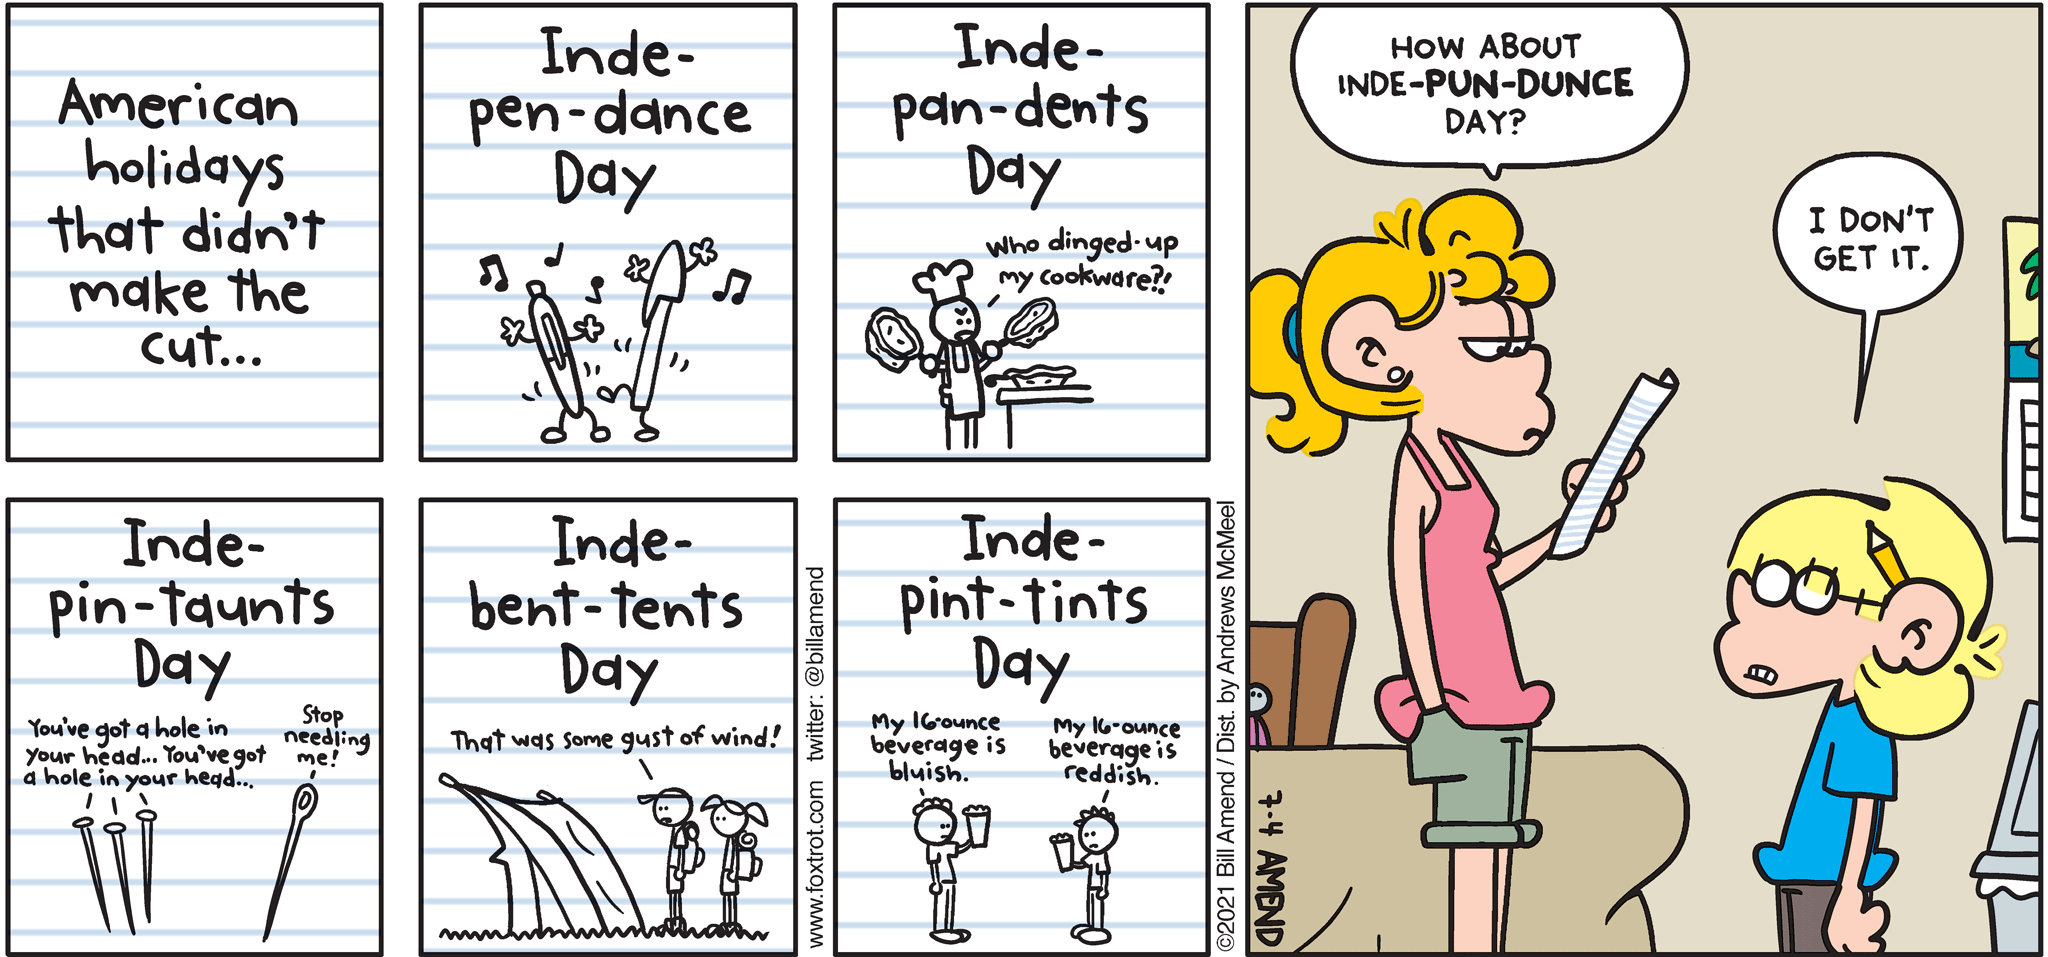 FoxTrot comic strip by Bill Amend - "Pun Dunce" published July 4, 2021 - American holidays that didn't quite make the cut... Inde-pen-dance Day, Inde-pan-dents Day "who dinged-up my cookware?!", Inde-pin-taunts Day "You've got a hole in your head... you've got a hole in your head... Stop needling me!", Inde-bent-tents Day "that was some gust of wind!", Inde-pint-tints Day "My 16-ounce beverage is bluish." "My 16-ounce beverage is reddish." Paige Fox: How about Inde-pun-dunce Day? Jason Fox: I don't get it. 